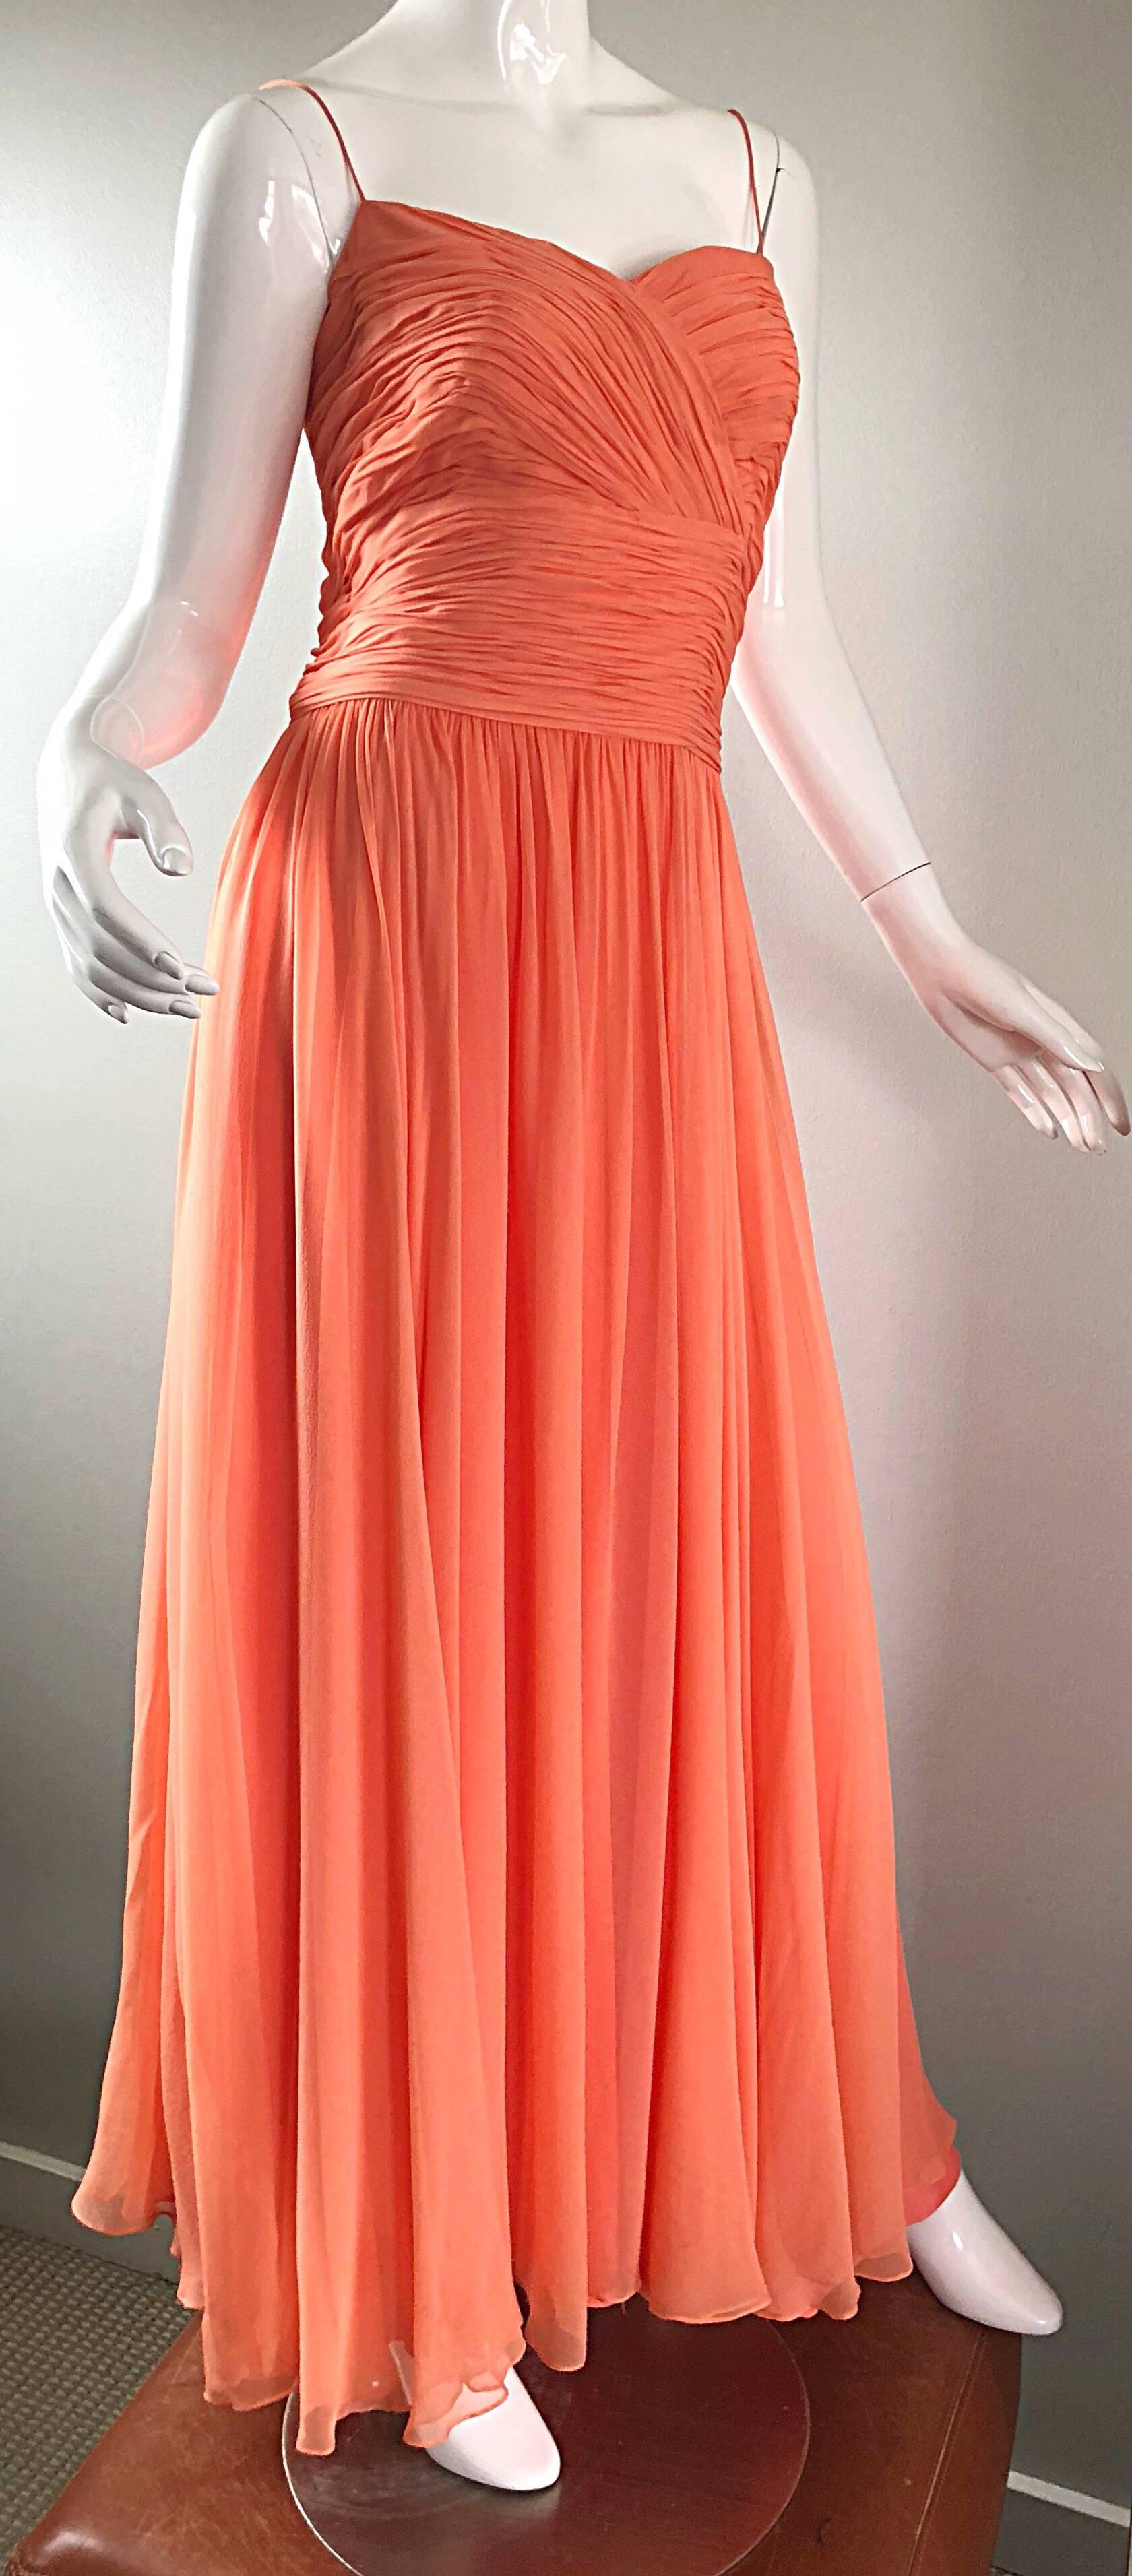 Gorgeous 1950s Saks 5th Ave. Salmon / Coral Pink Silk Chiffon Vintage 50s Gown 9